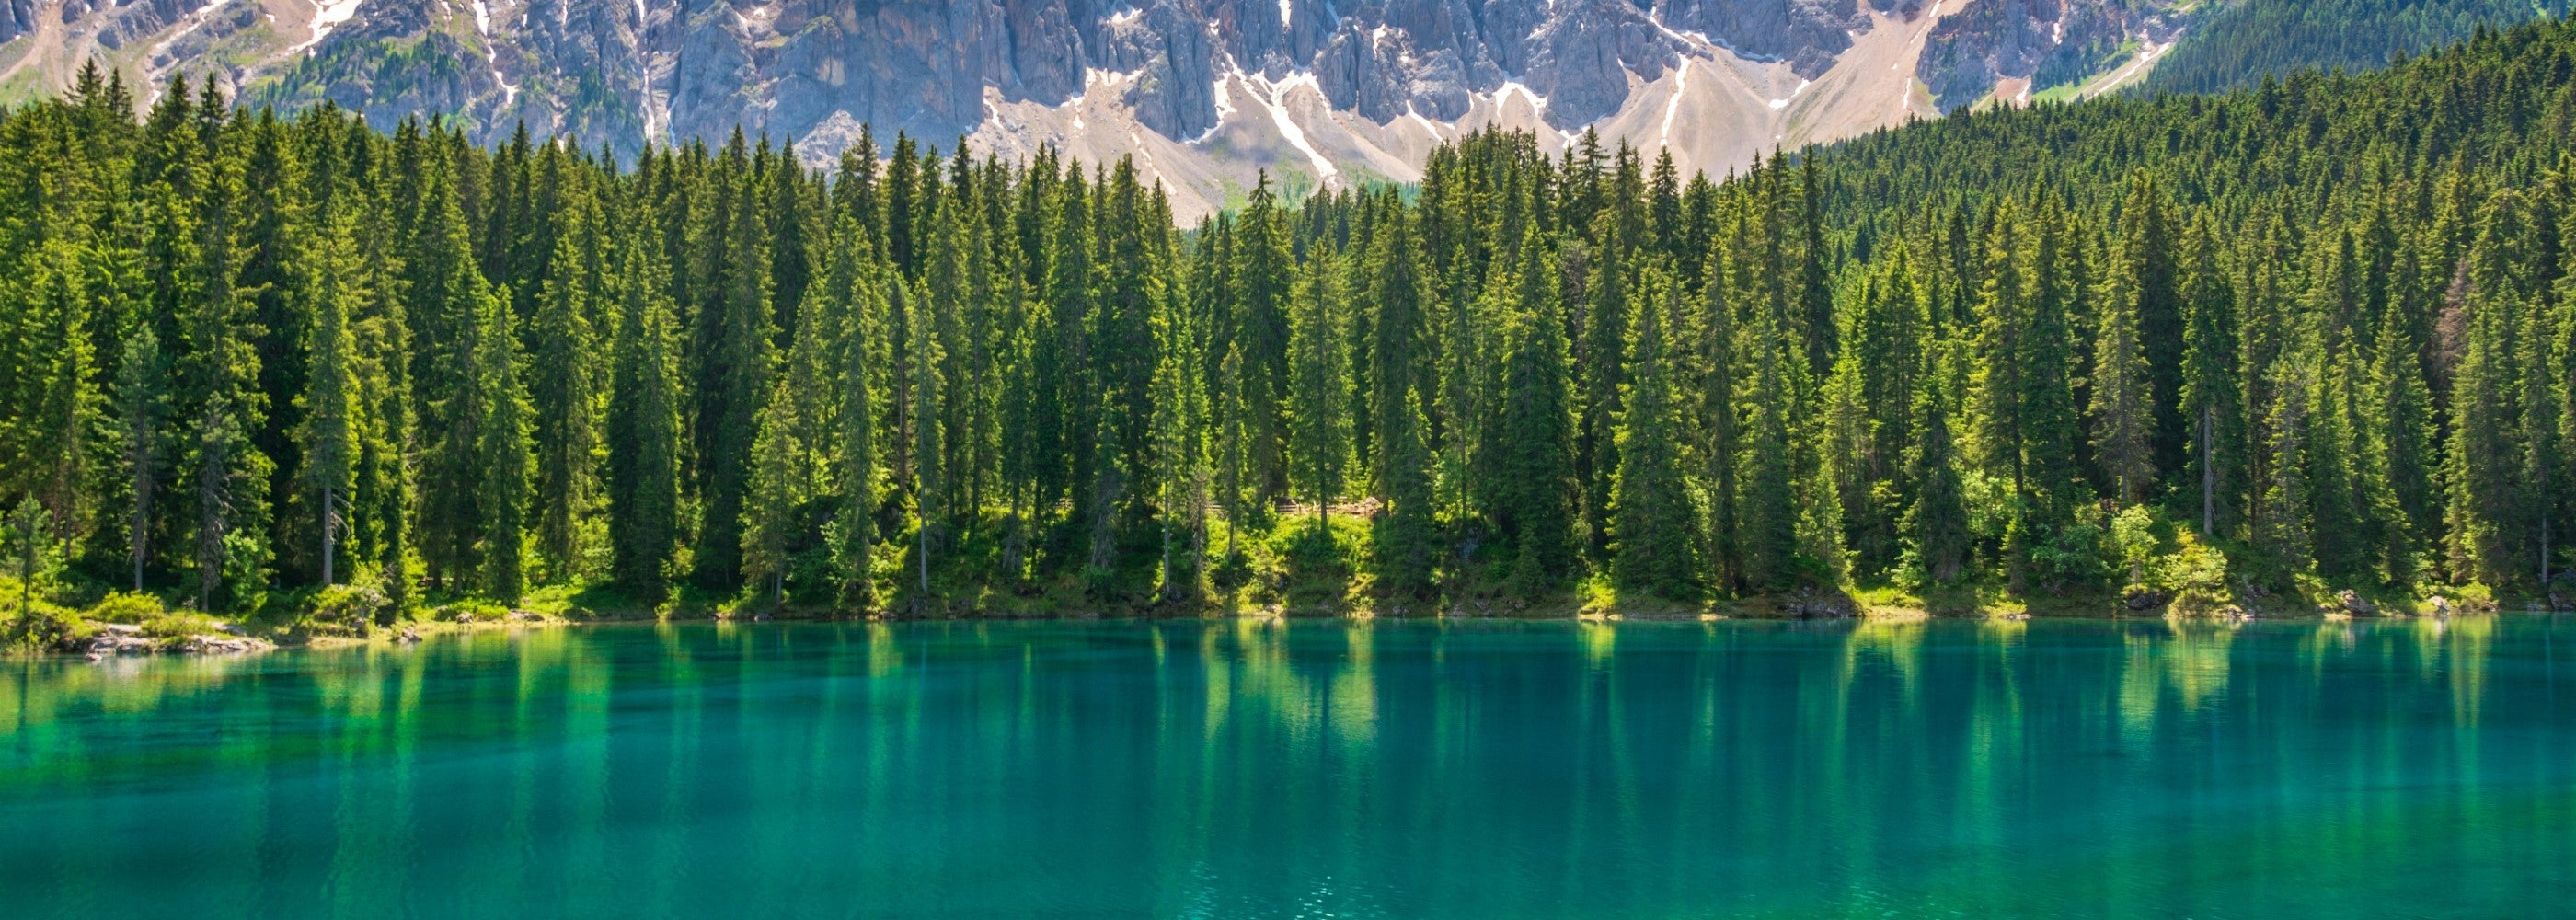 A serene landscape showing a crystal-clear lake surrounded by dense green forests with a backdrop of snow-capped mountains.